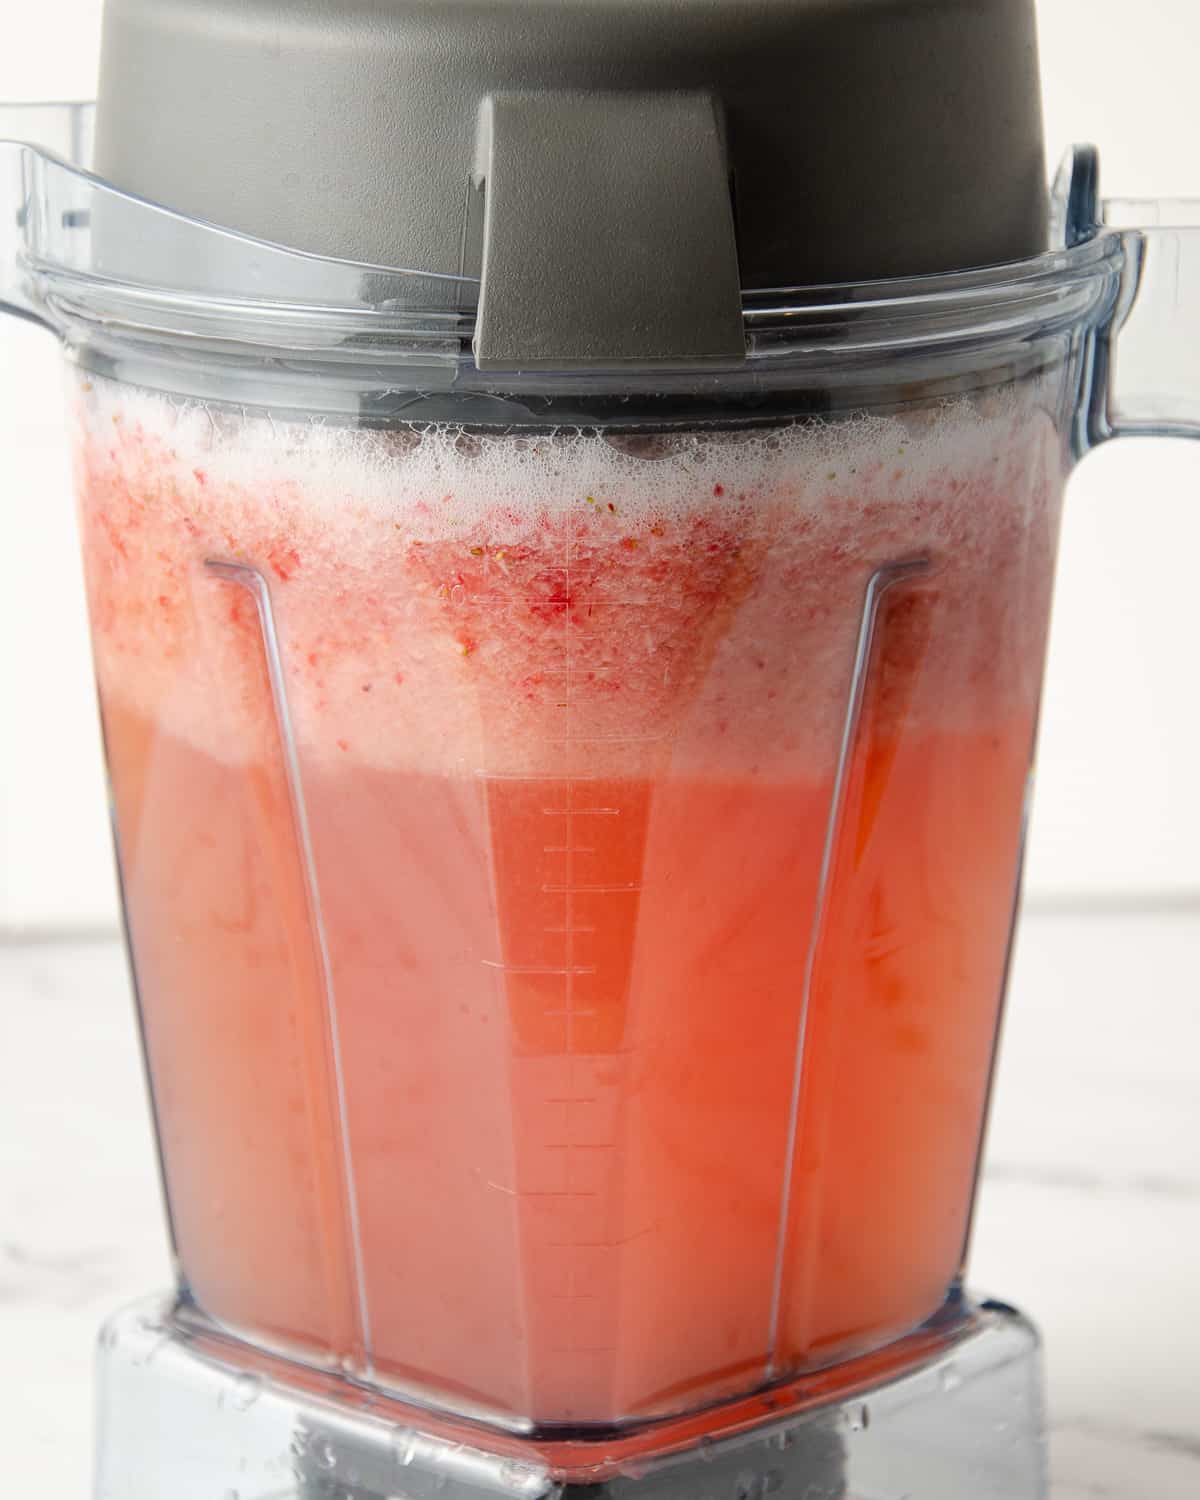 A blender full of blended strawberries and water.